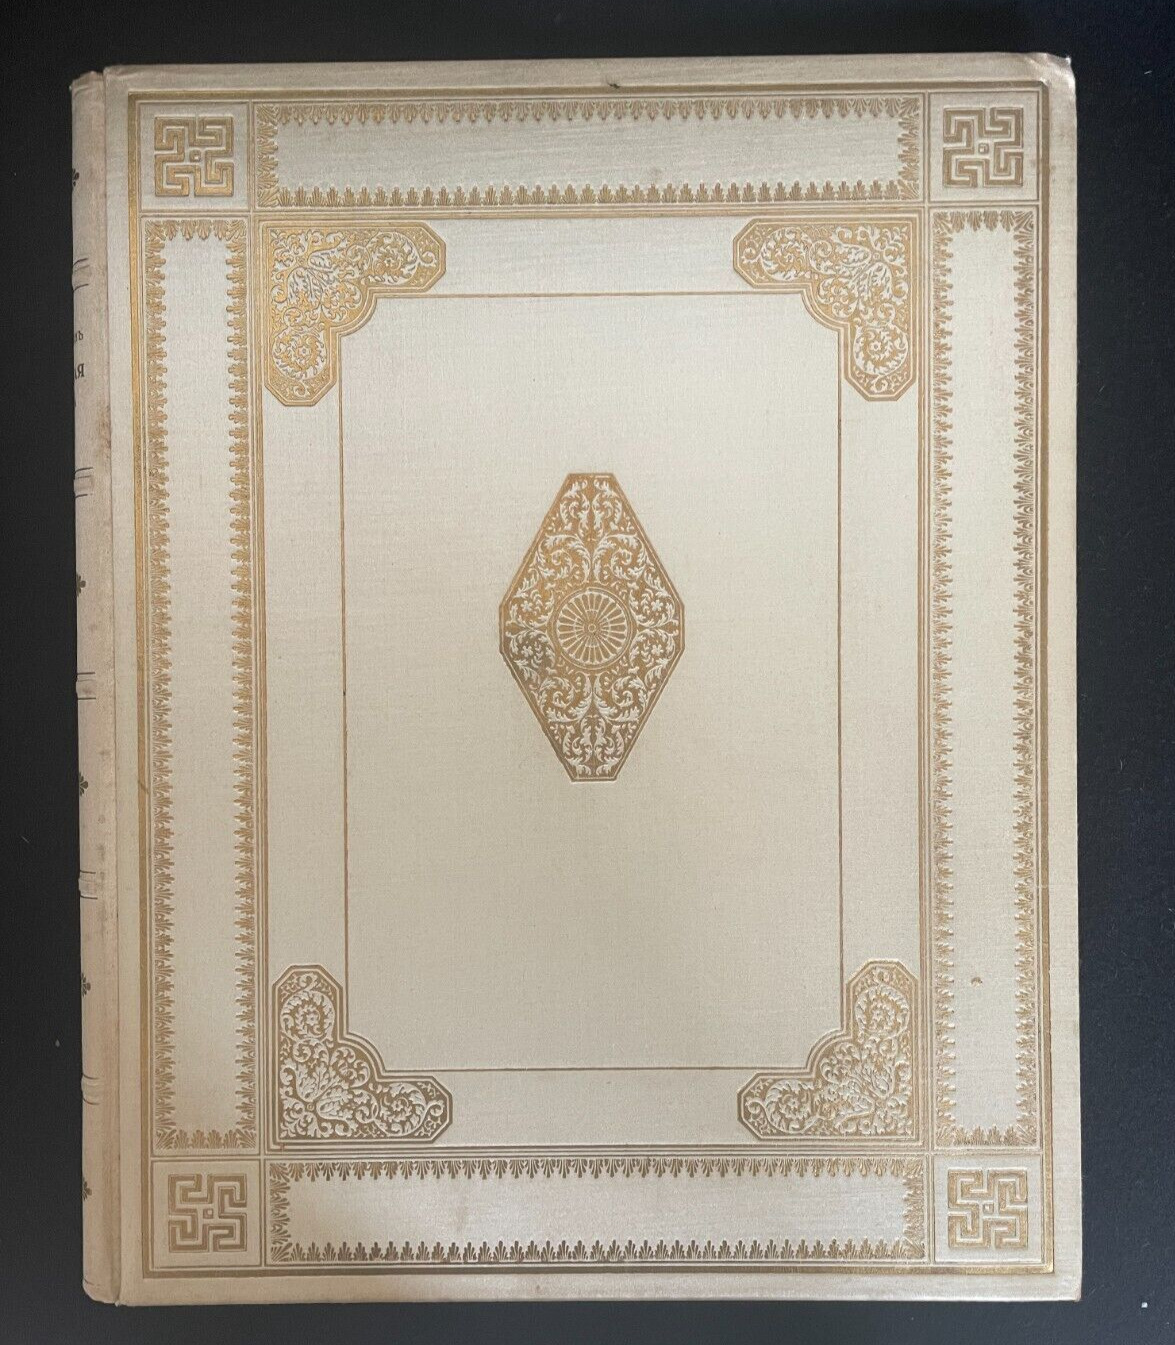 RARE 1911 RUSSIAN BOOK: A. PUSHKIN QUEEN OF SPADES WITH A. BENOIS ILLUSTRATIONS